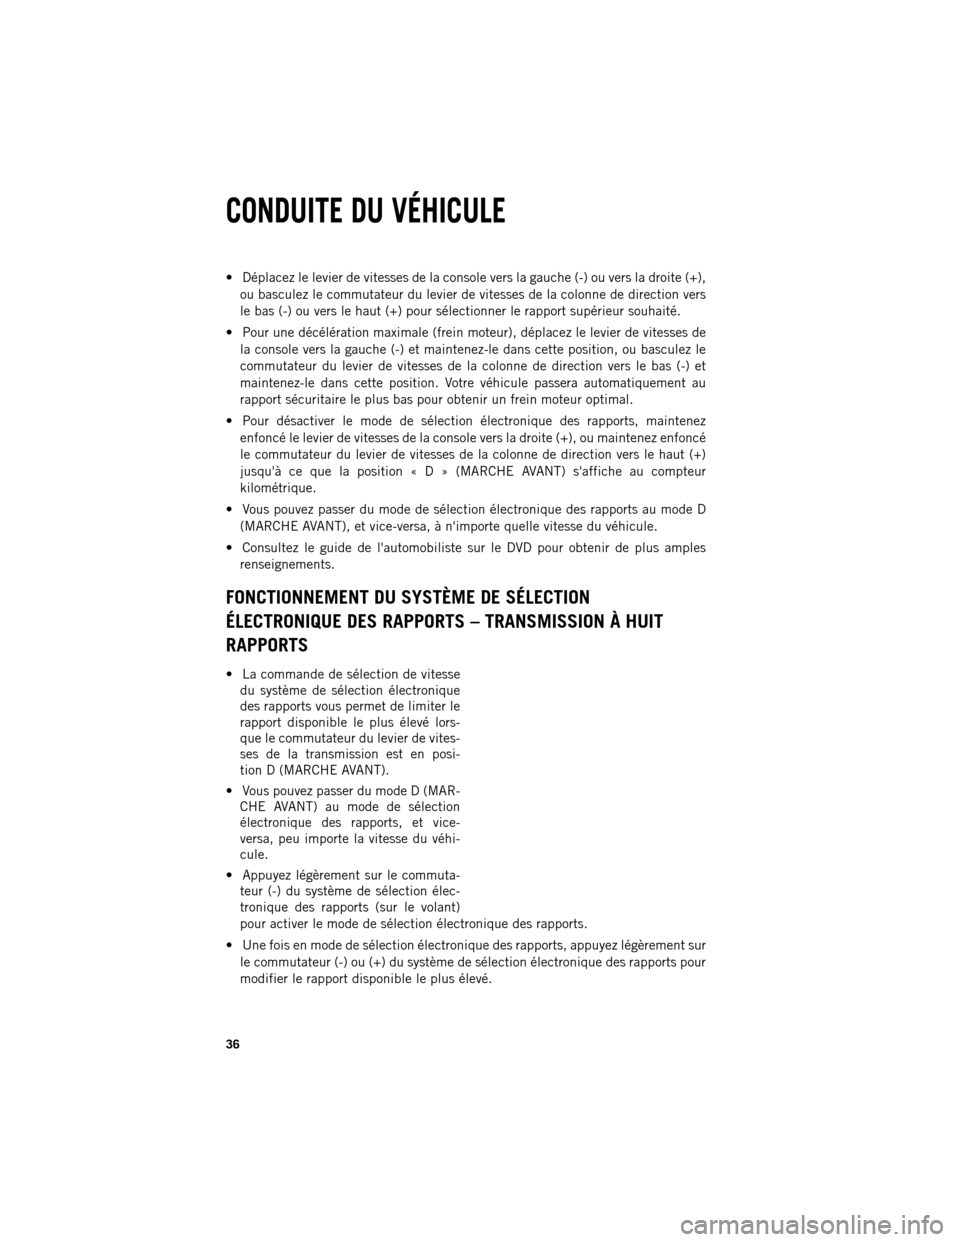 Ram 1500 2013  Guide dutilisateur (in French)  Déplacez le levier de vitesses de la console vers la gauche (-) ou vers la droite (+),
ou basculez le commutateur du levier de vitesses de la colonne de direction vers
le bas (-) ou vers le haut (+